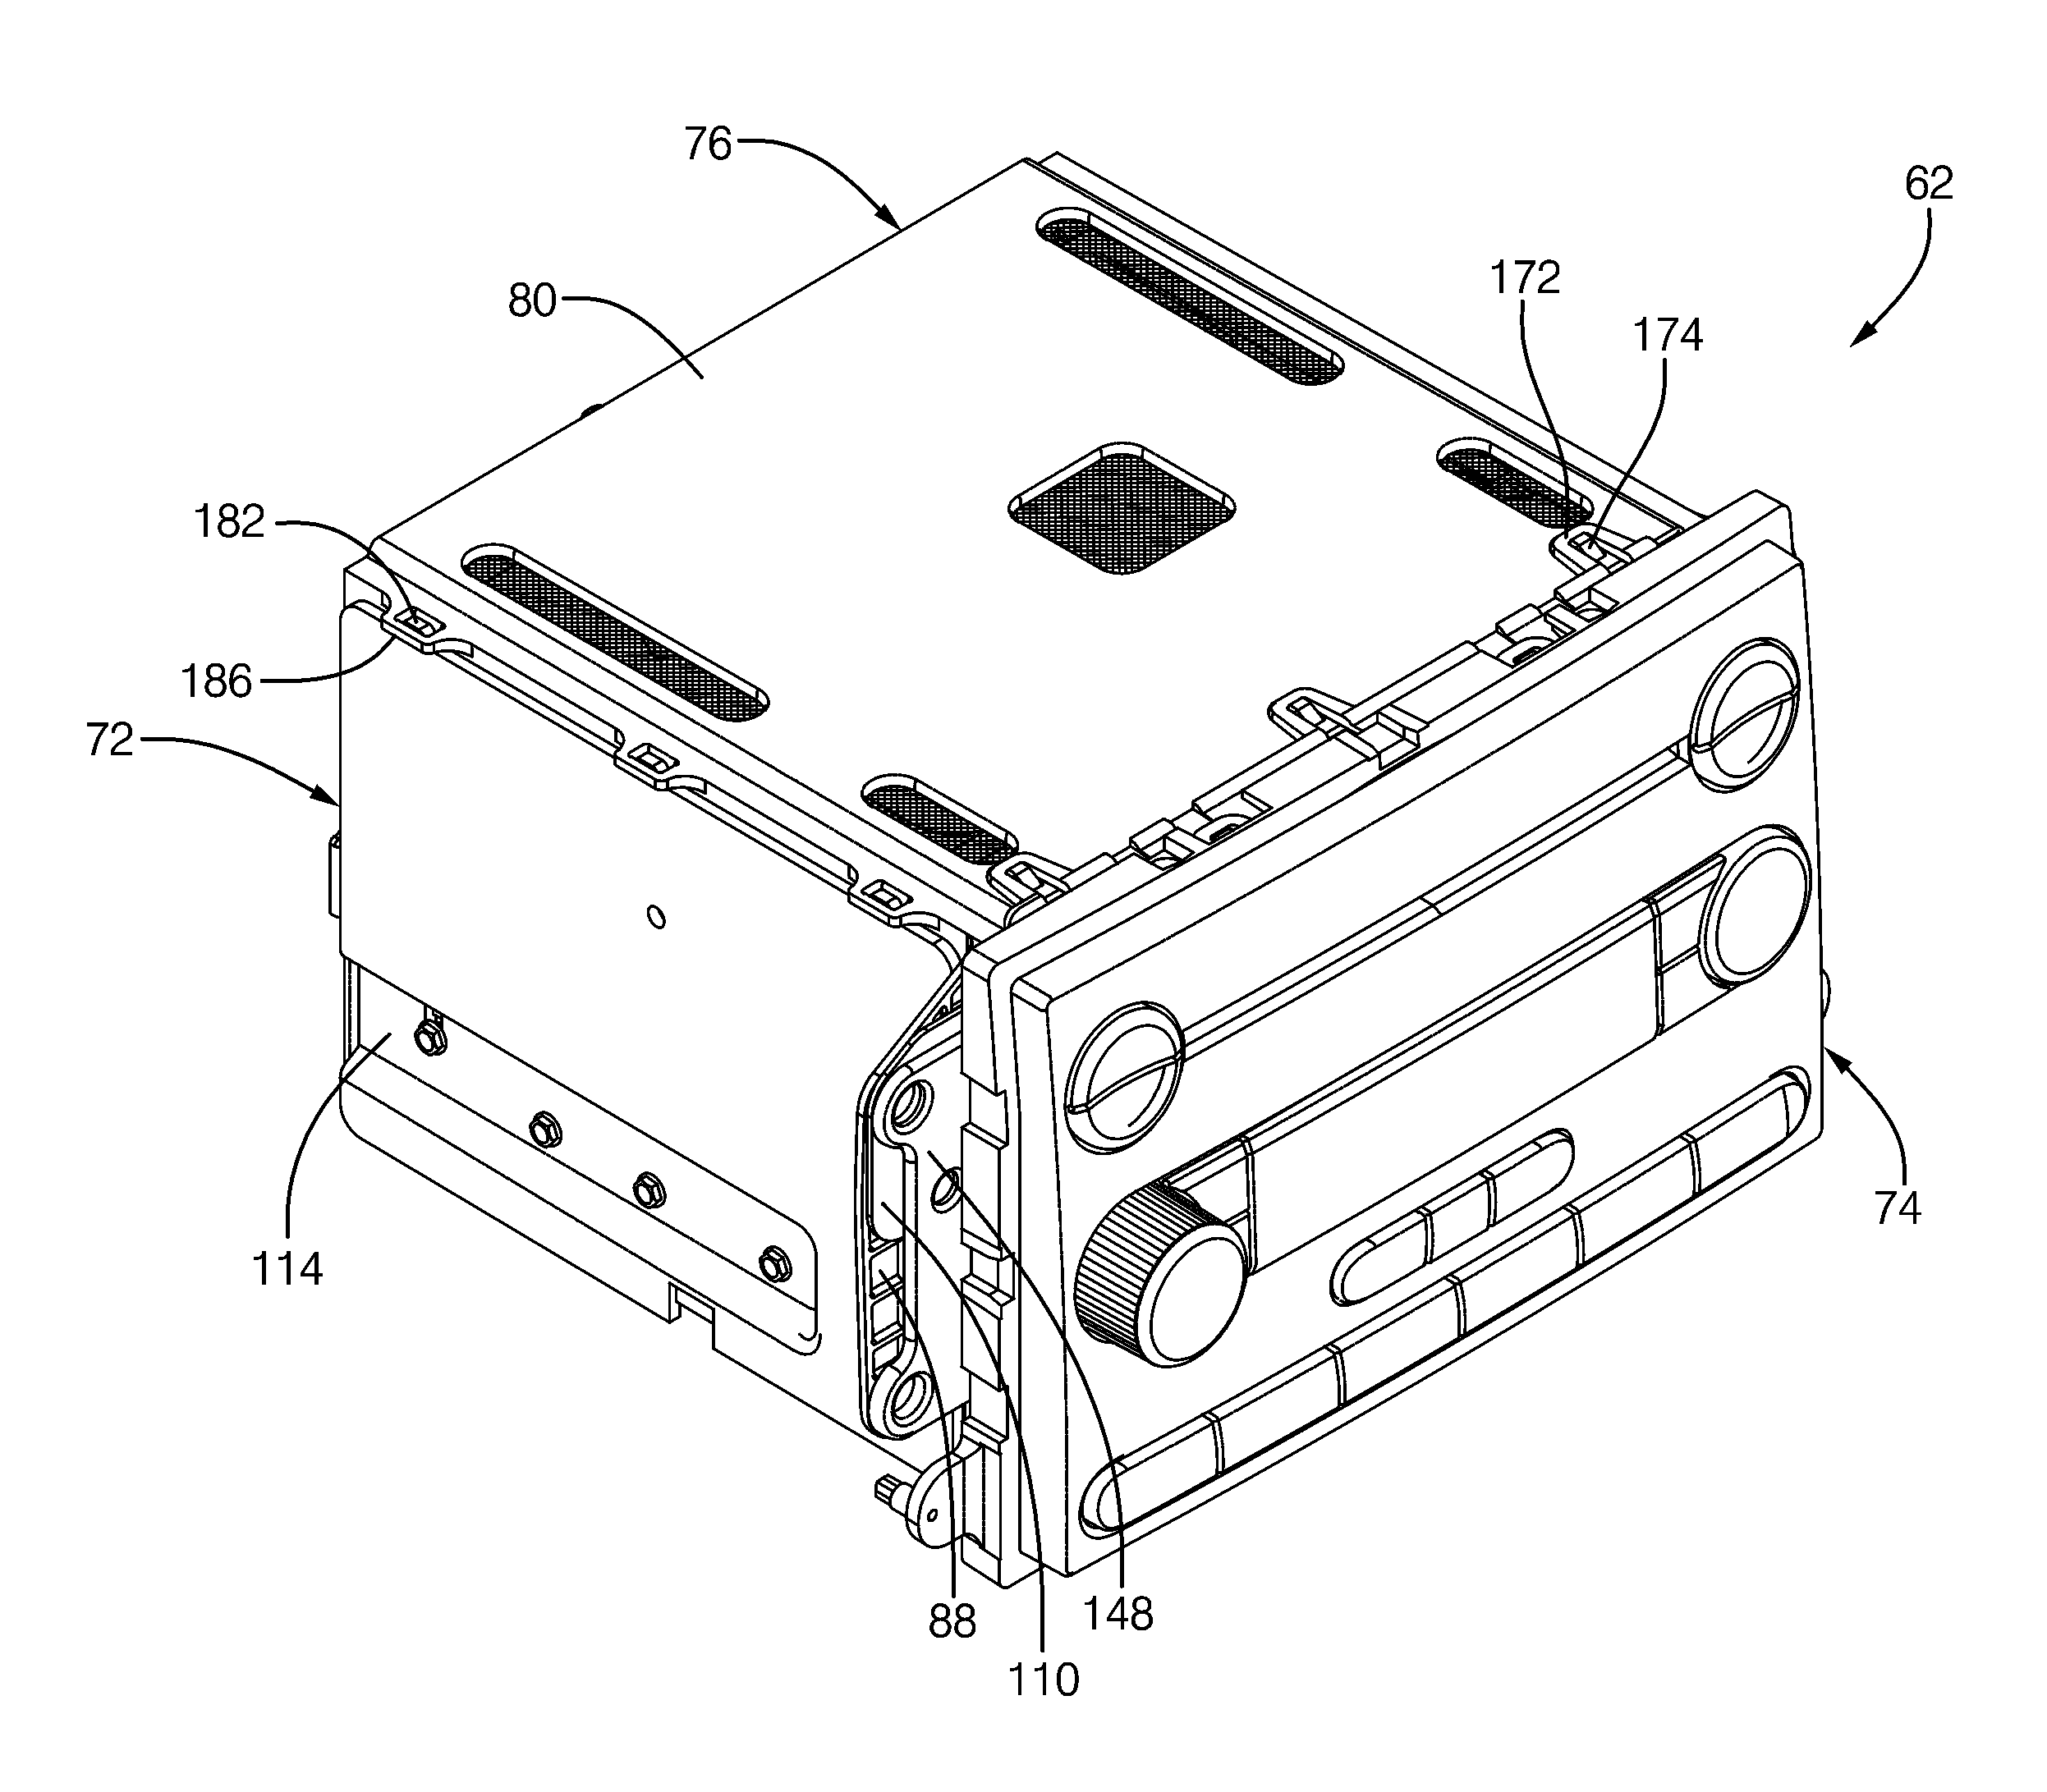 Flexible electronic circuit enclosure assembly